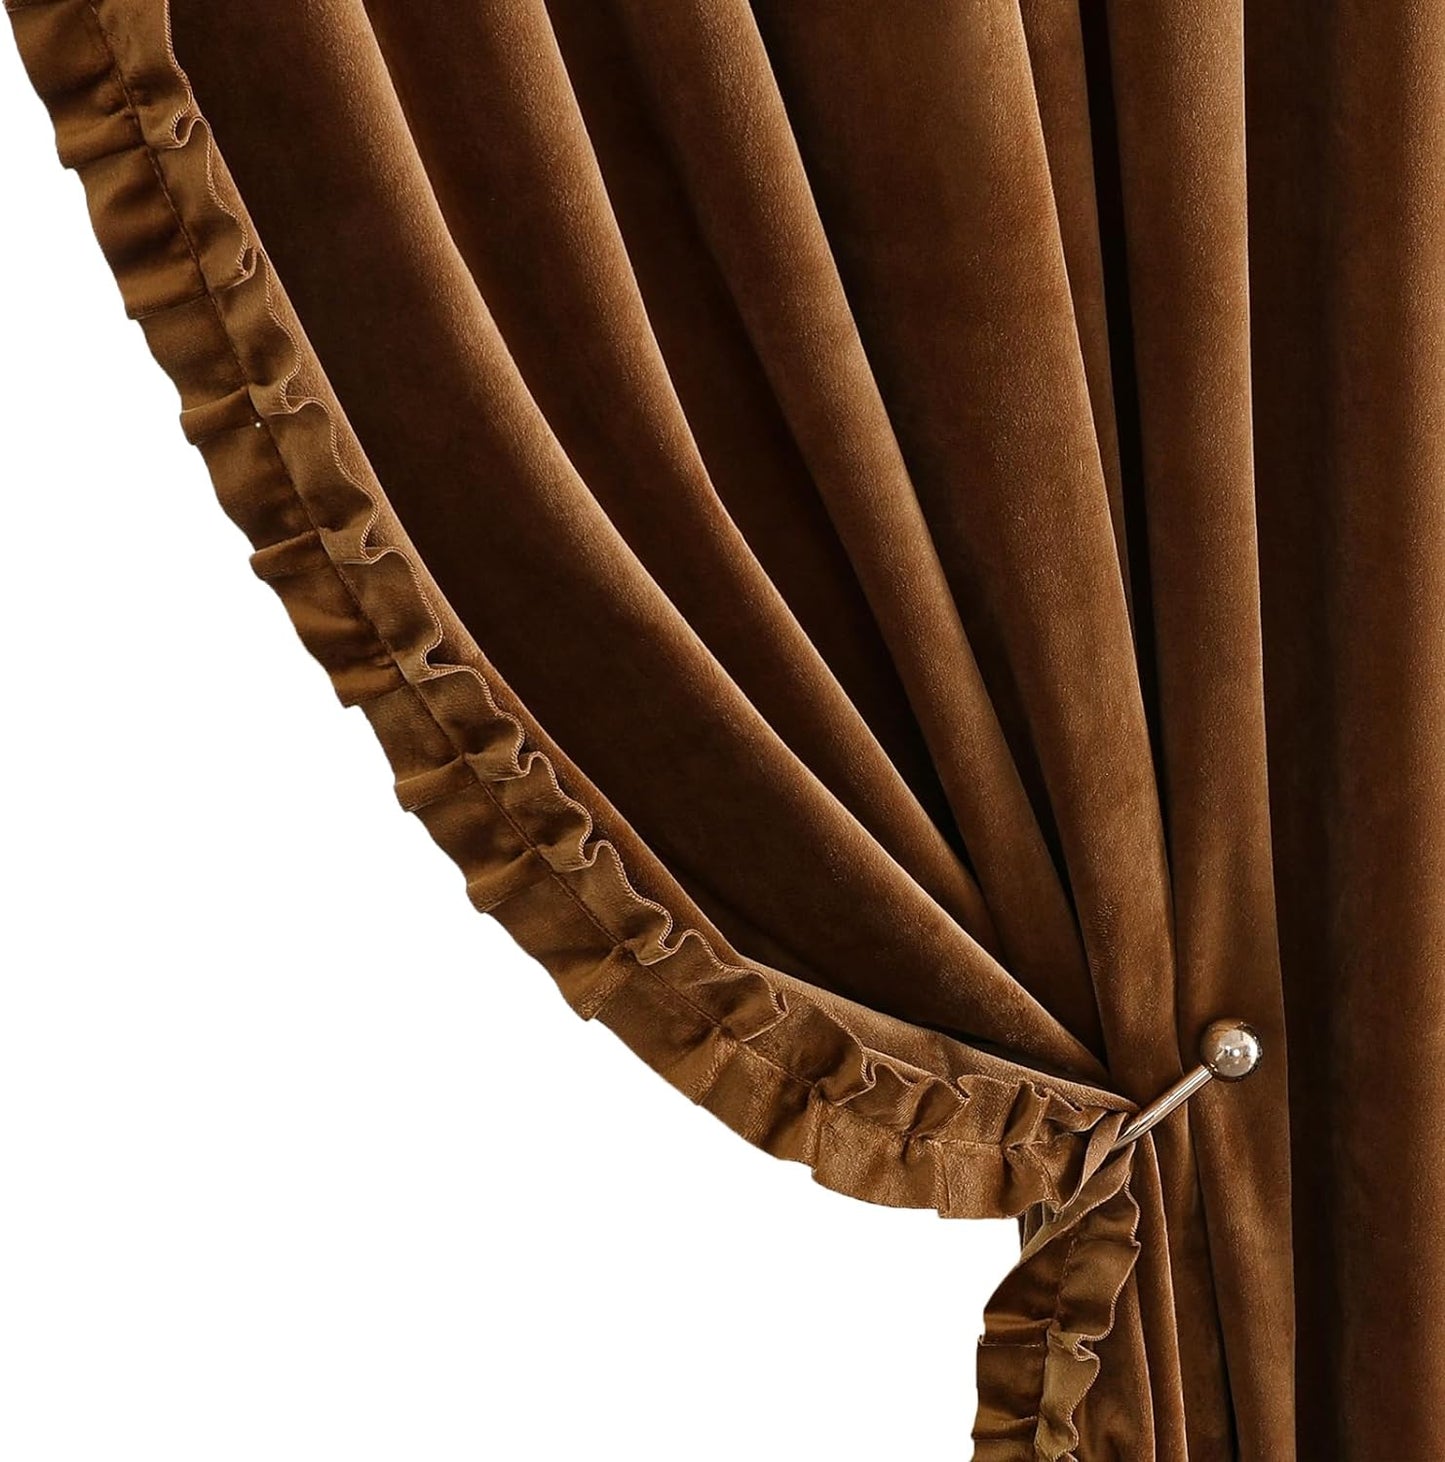 Benedeco Green Velvet Curtains for Bedroom Window, Super Soft Luxury Drapes, Room Darkening Thermal Insulated Rod Pocket Curtain for Living Room, W52 by L84 Inches, 2 Panels  Benedeco Goldbrown-Ruffle W52 * L63 | 2 Panels 